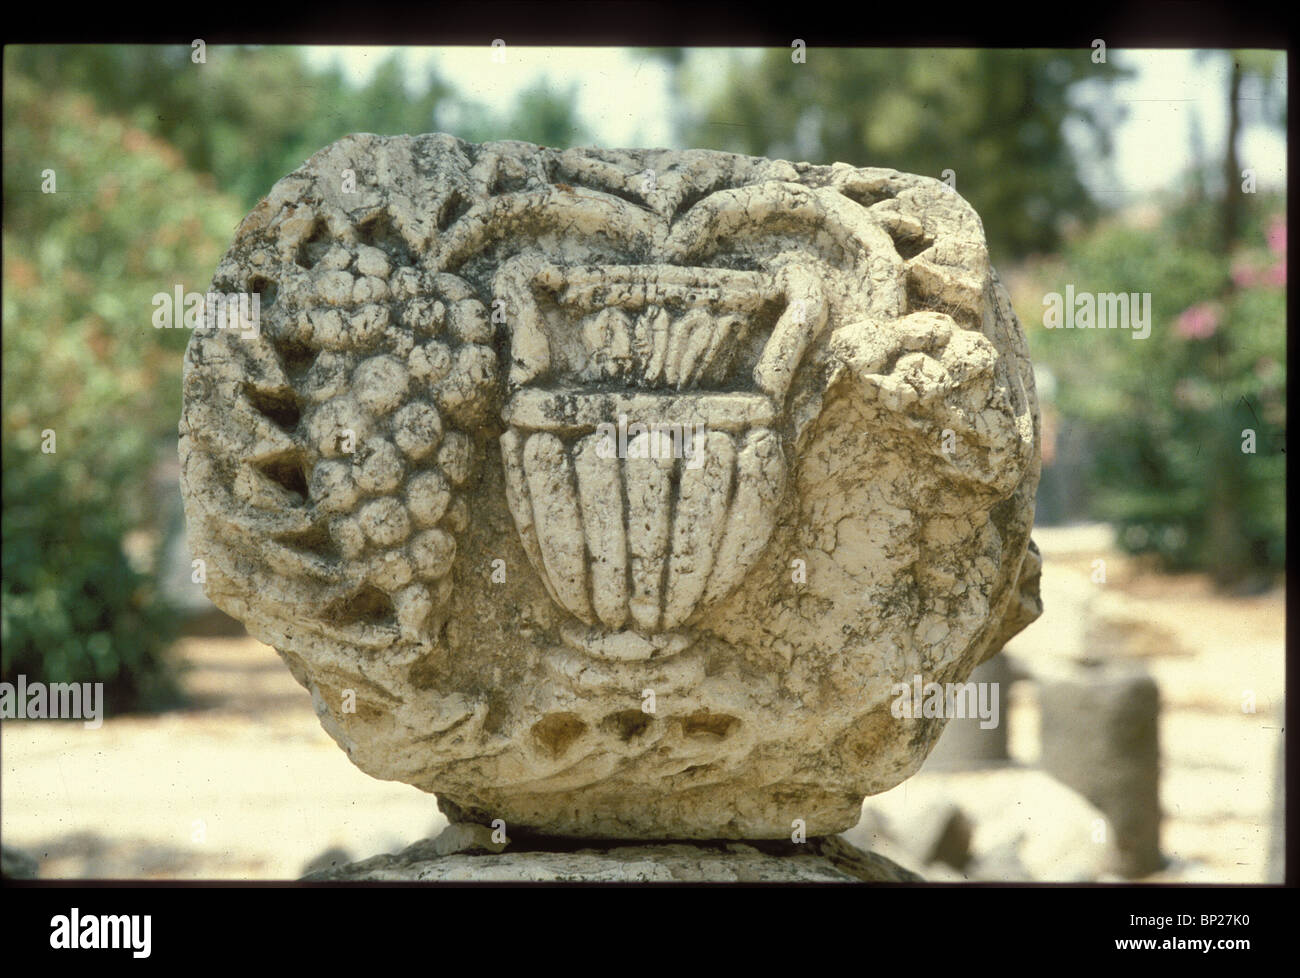 888. CAPERNAUM - ARCHITECTURAL DETAILS FROM THE 4TH. C. SYNAGOGUE. STONE CARVINGS DEPICTING AN AMPHORA AND GRAPES Stock Photo